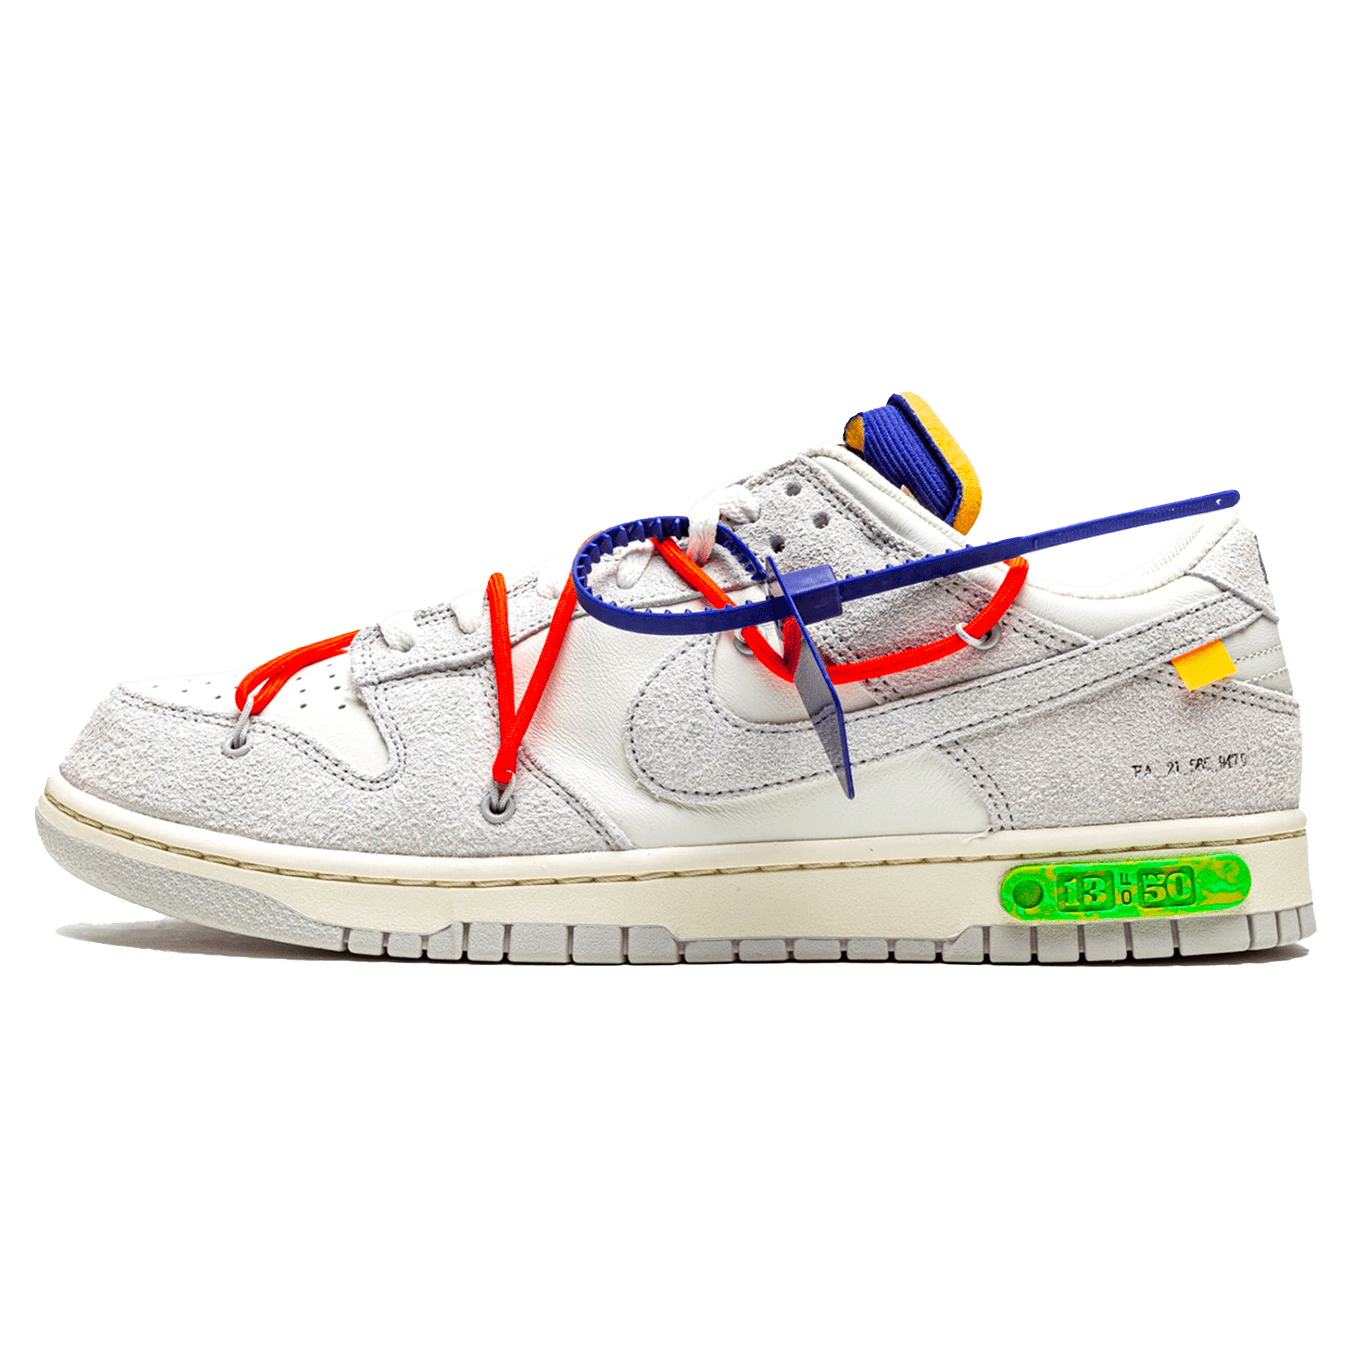 Off-White x Nike Dunk Low 'Lot 13 of 50' — Kick Game